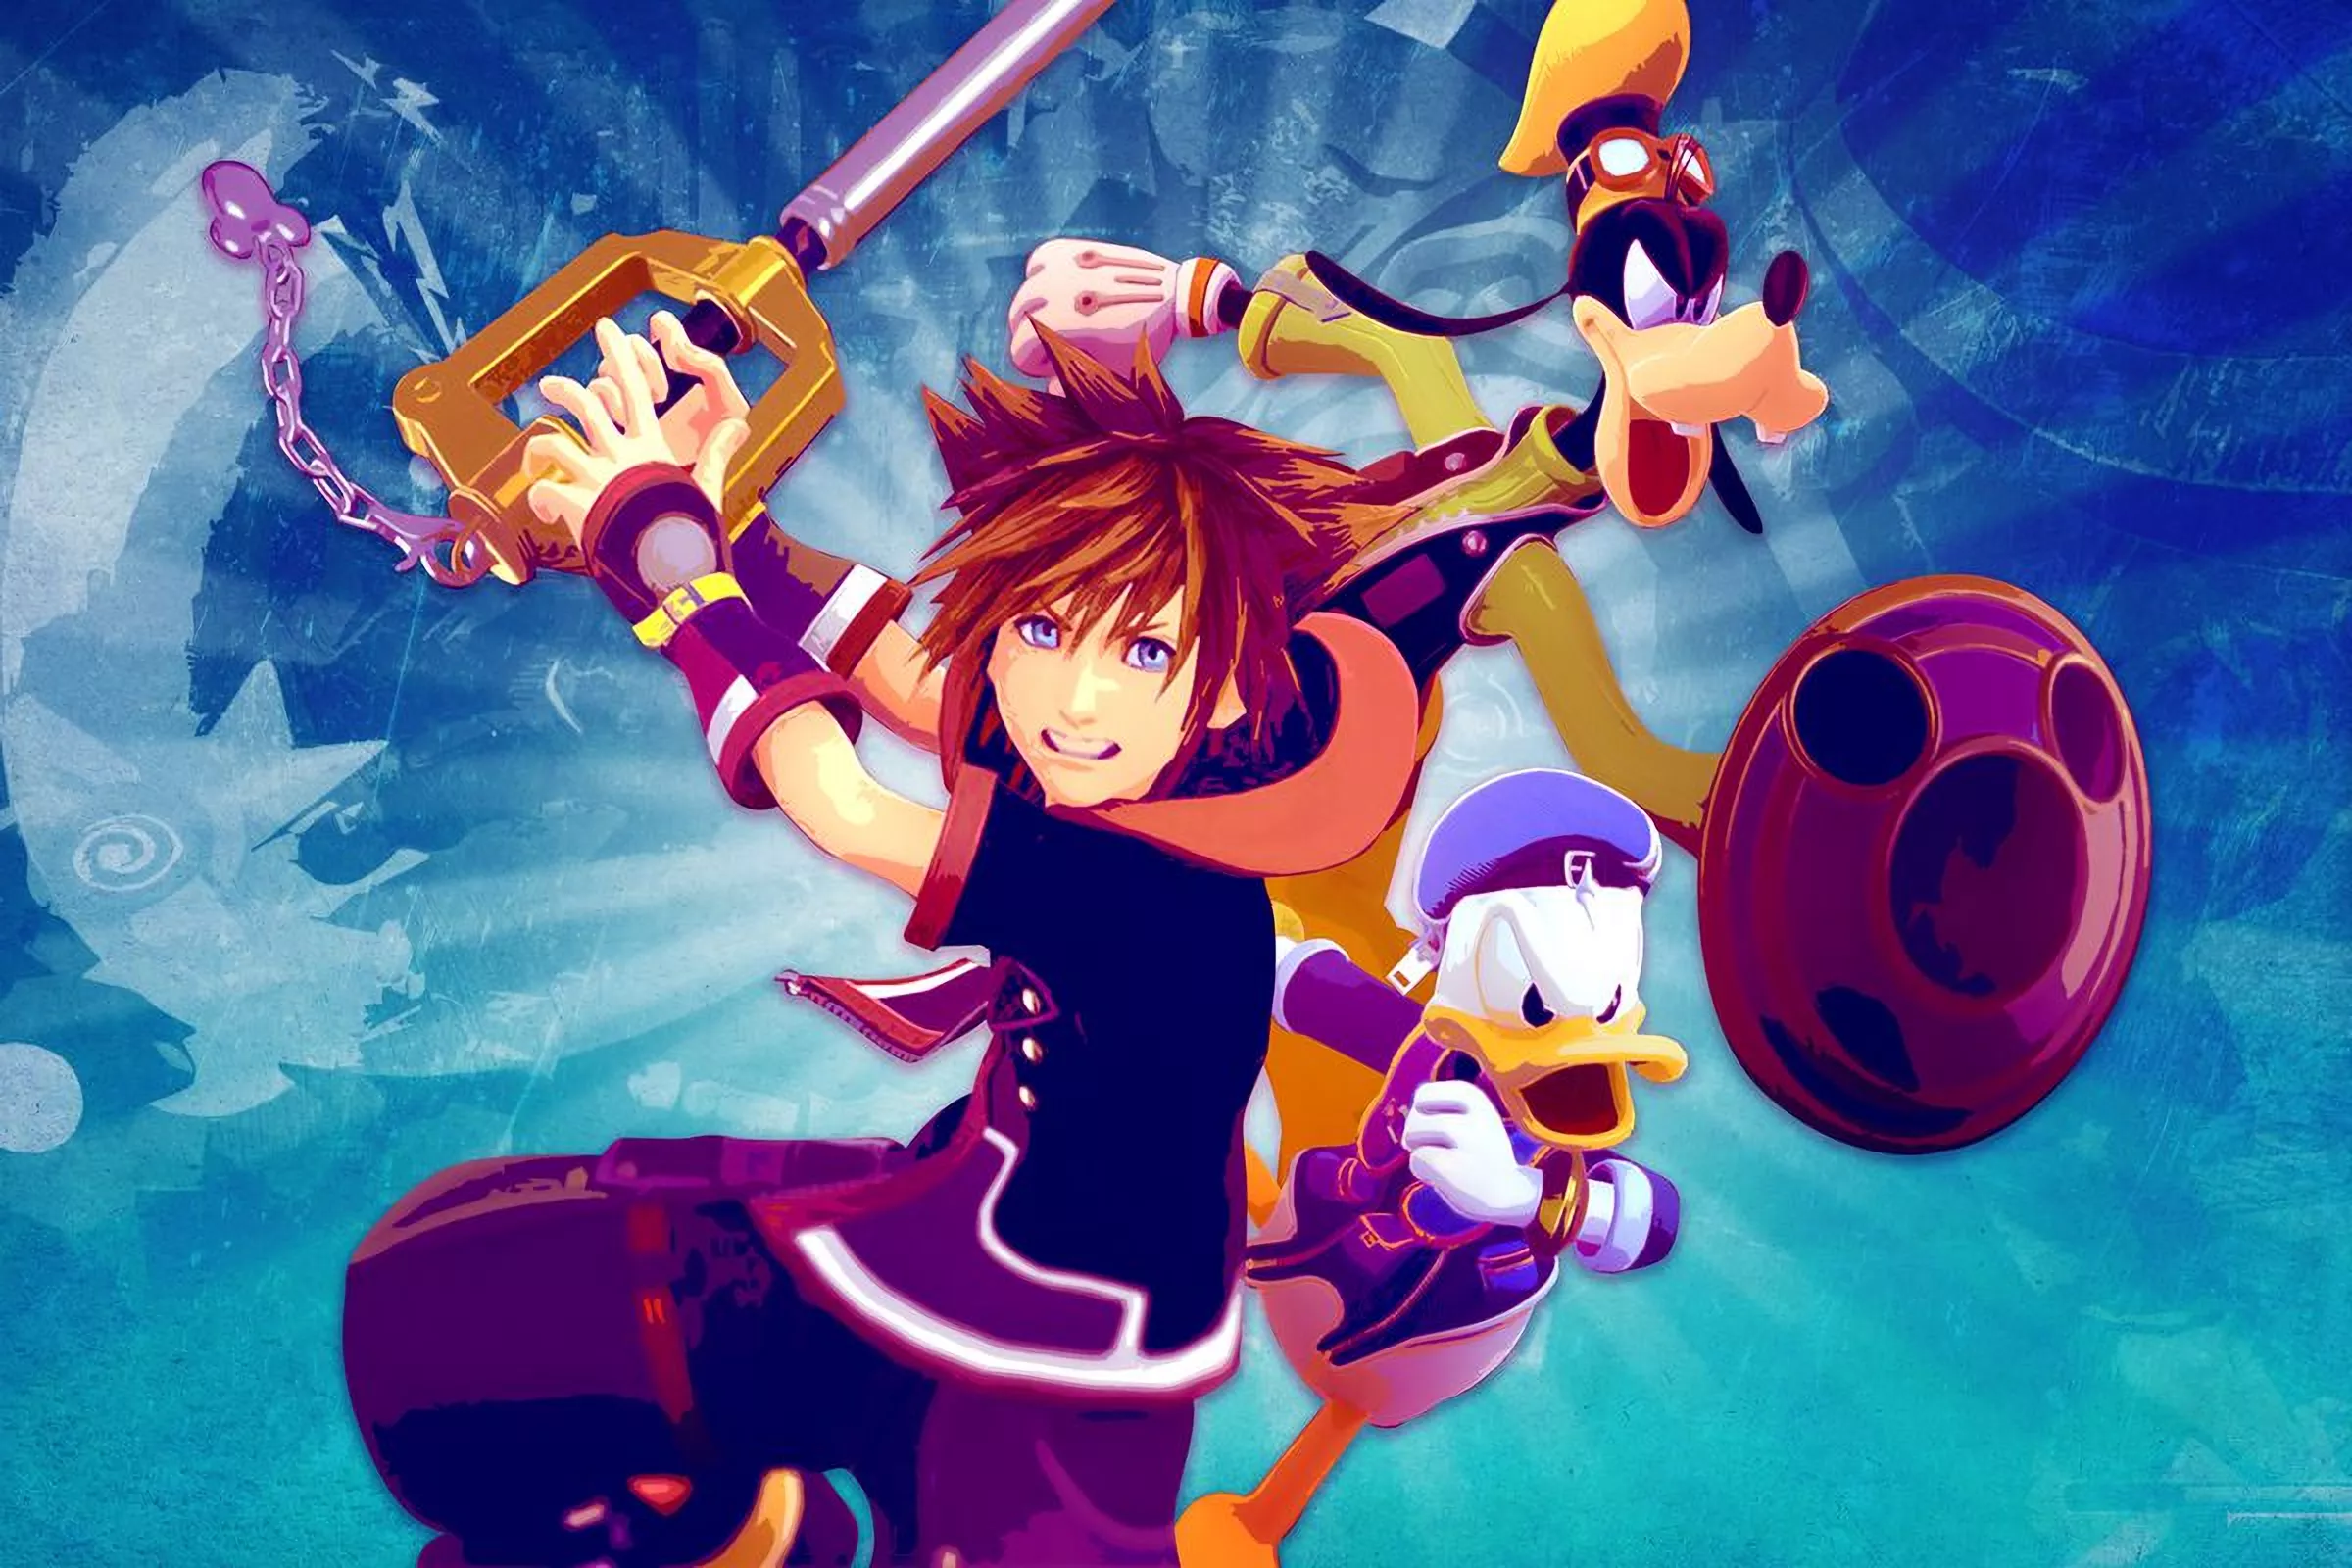 Kingdom Hearts coming to PC after nearly 20 years as a console exclusive